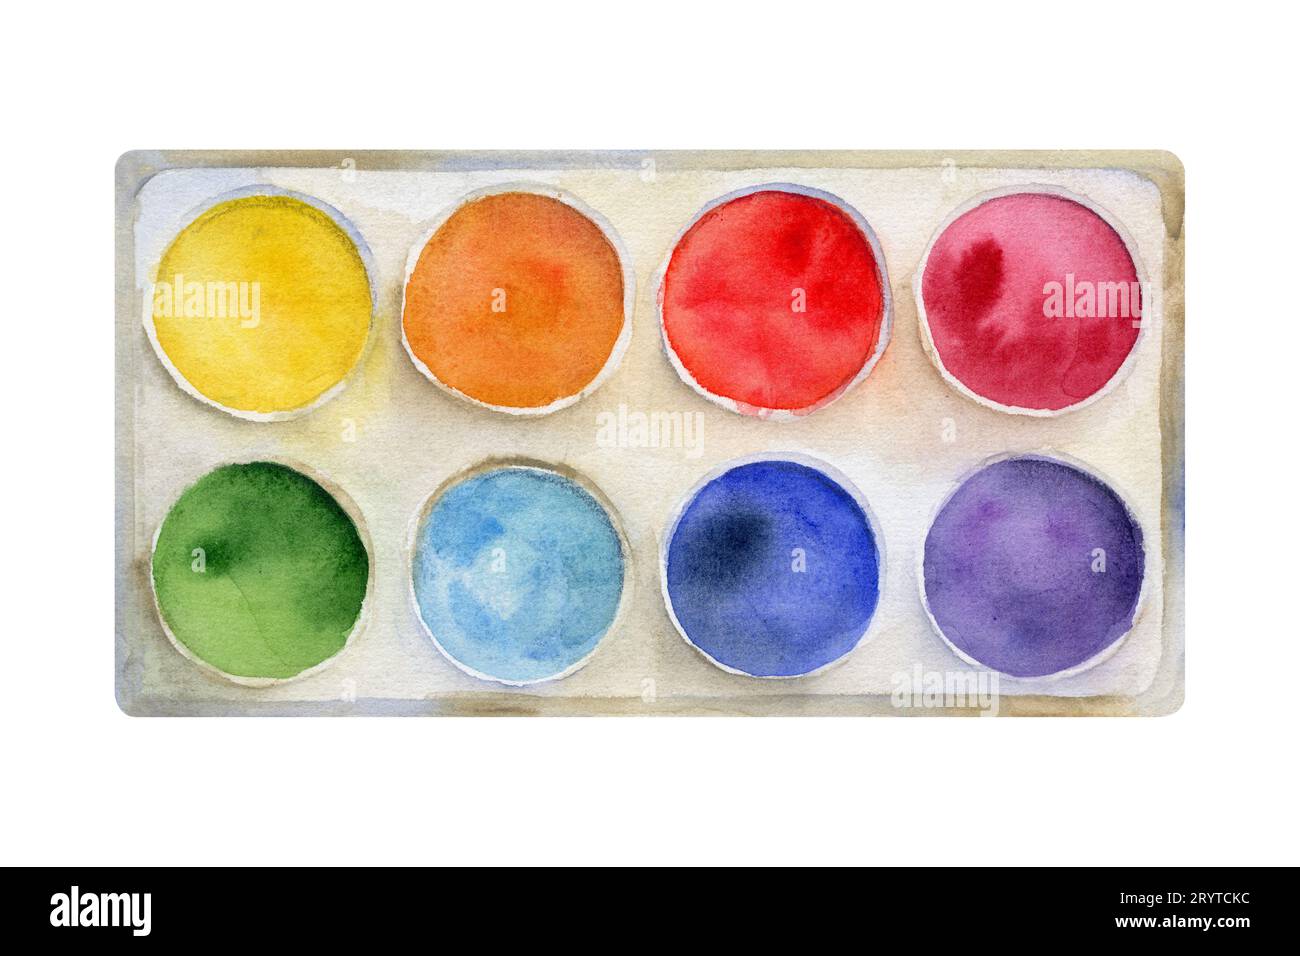 https://c8.alamy.com/comp/2RYTCKC/watercolor-hand-drawn-illustration-kids-children-painting-materials-supplies-mix-color-palette-box-art-pallet-single-object-isolated-on-white-for-2RYTCKC.jpg